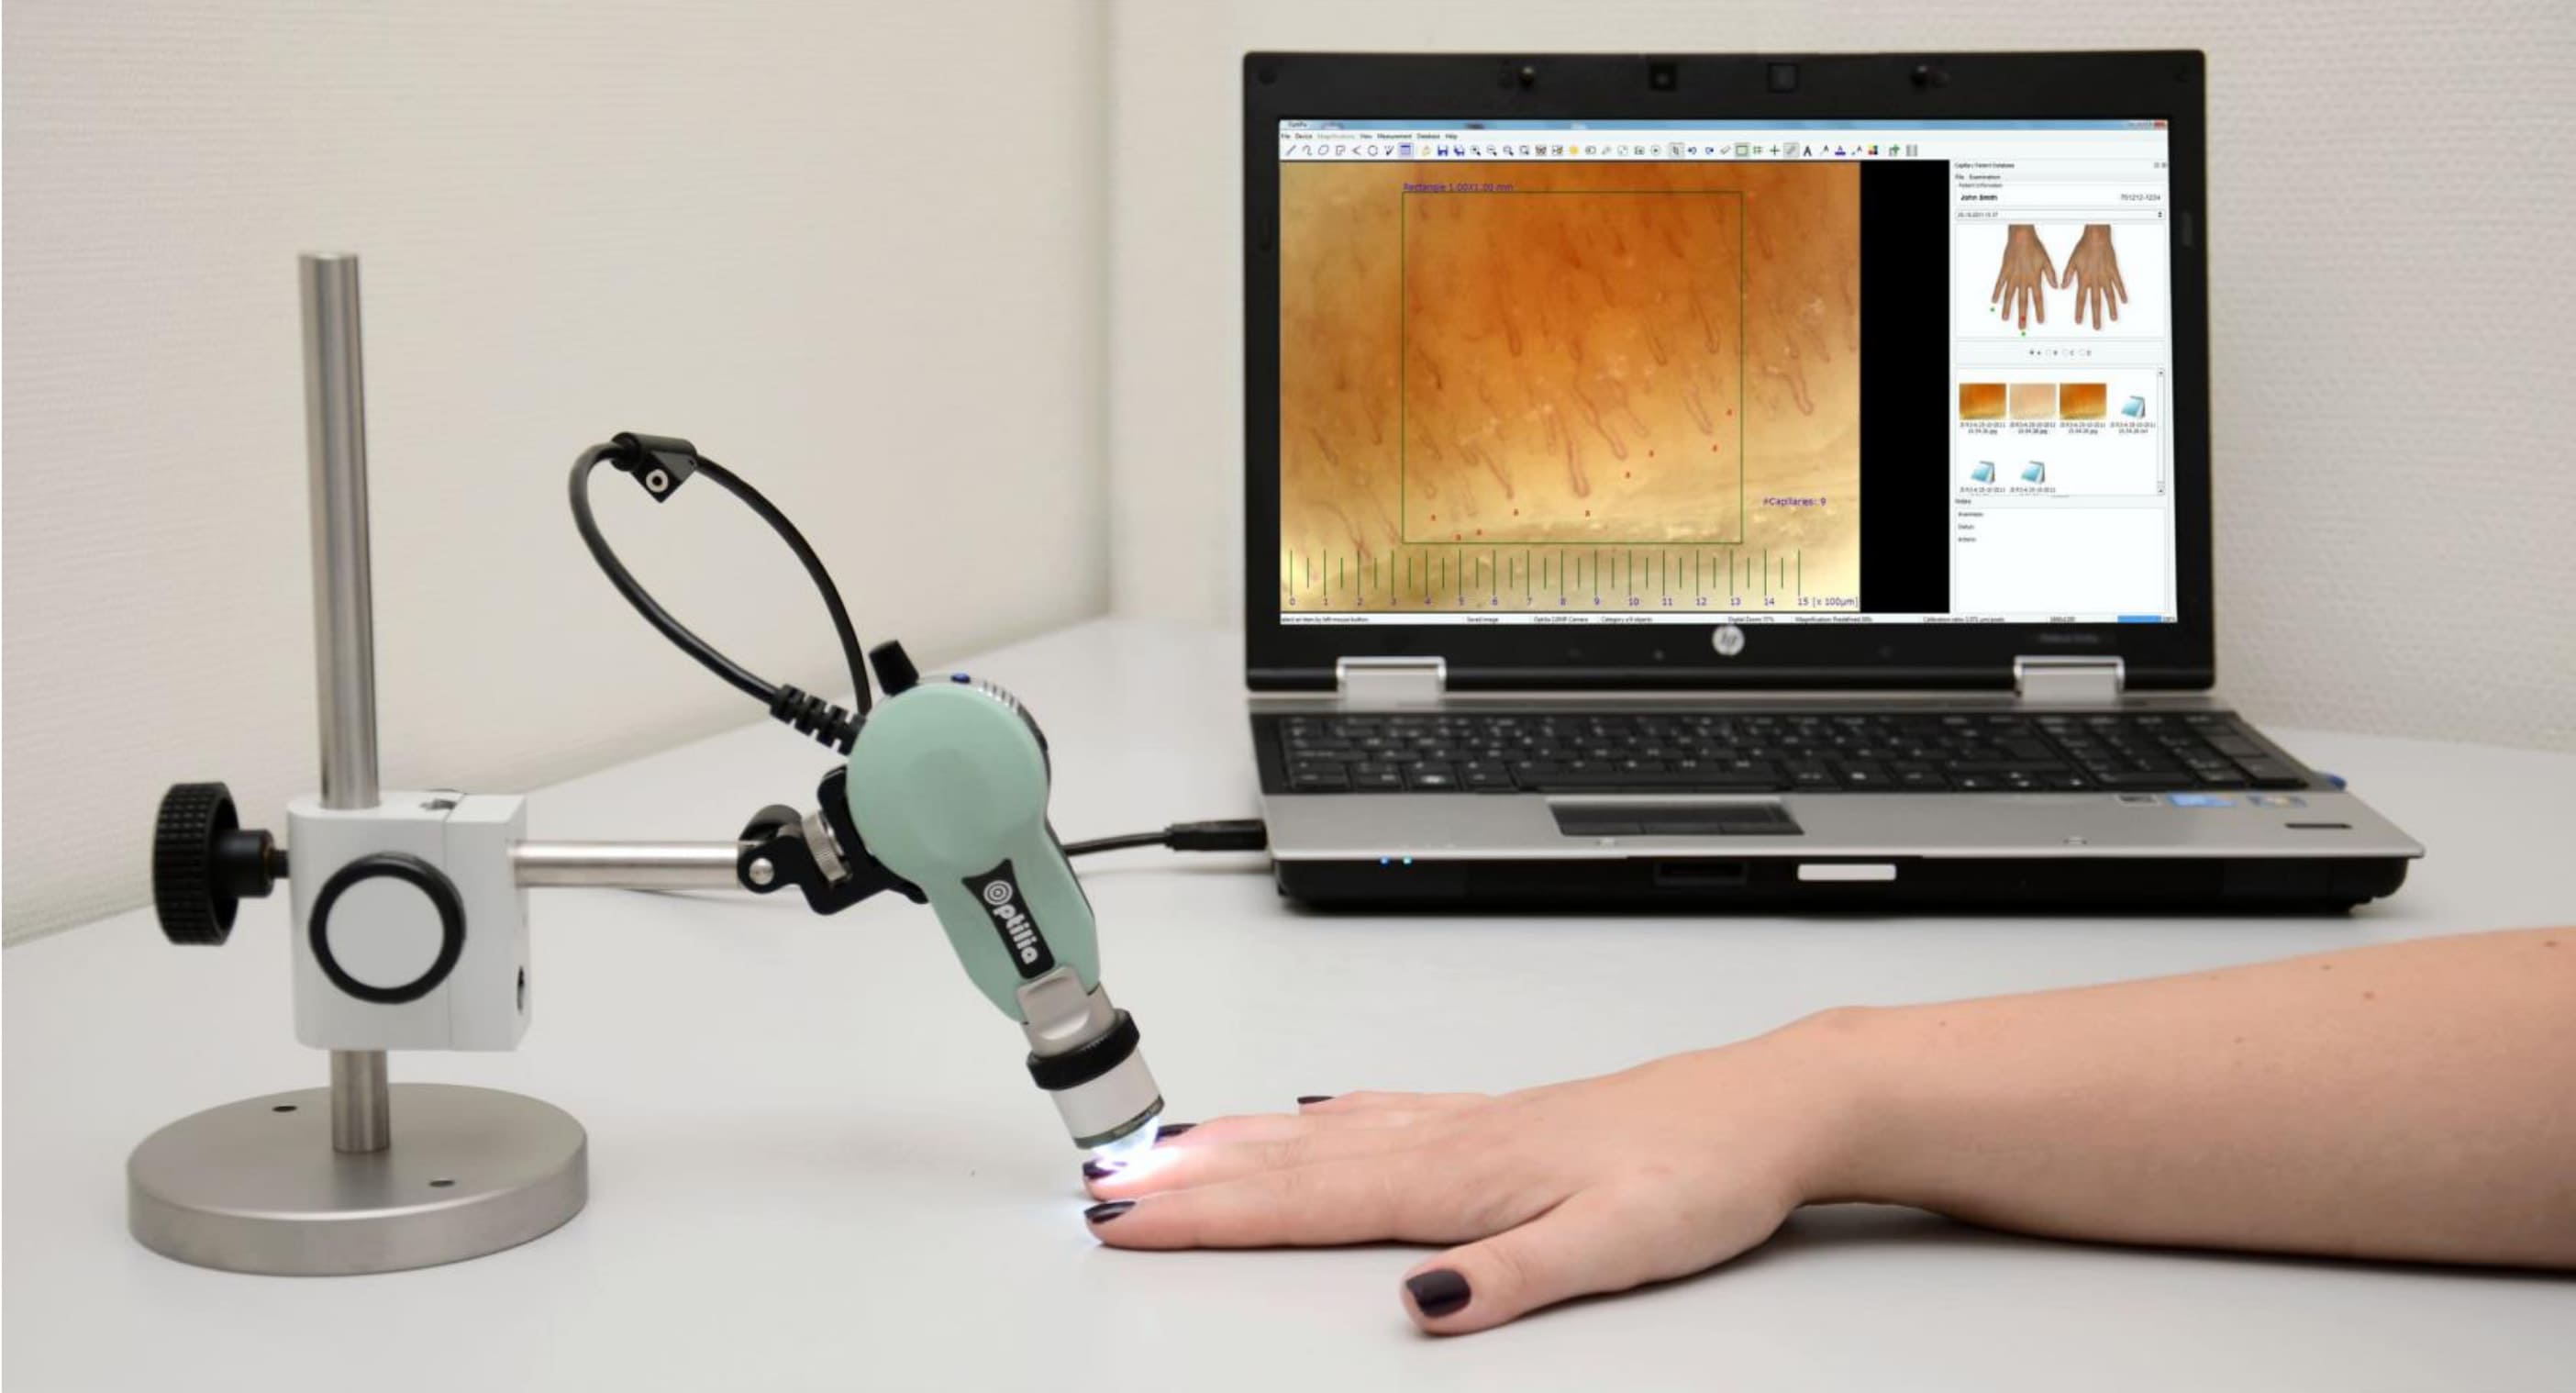 Capillaroscopy procedure - The capillaries at the base of the nails are observed using a portable USB microscope connected to the computer